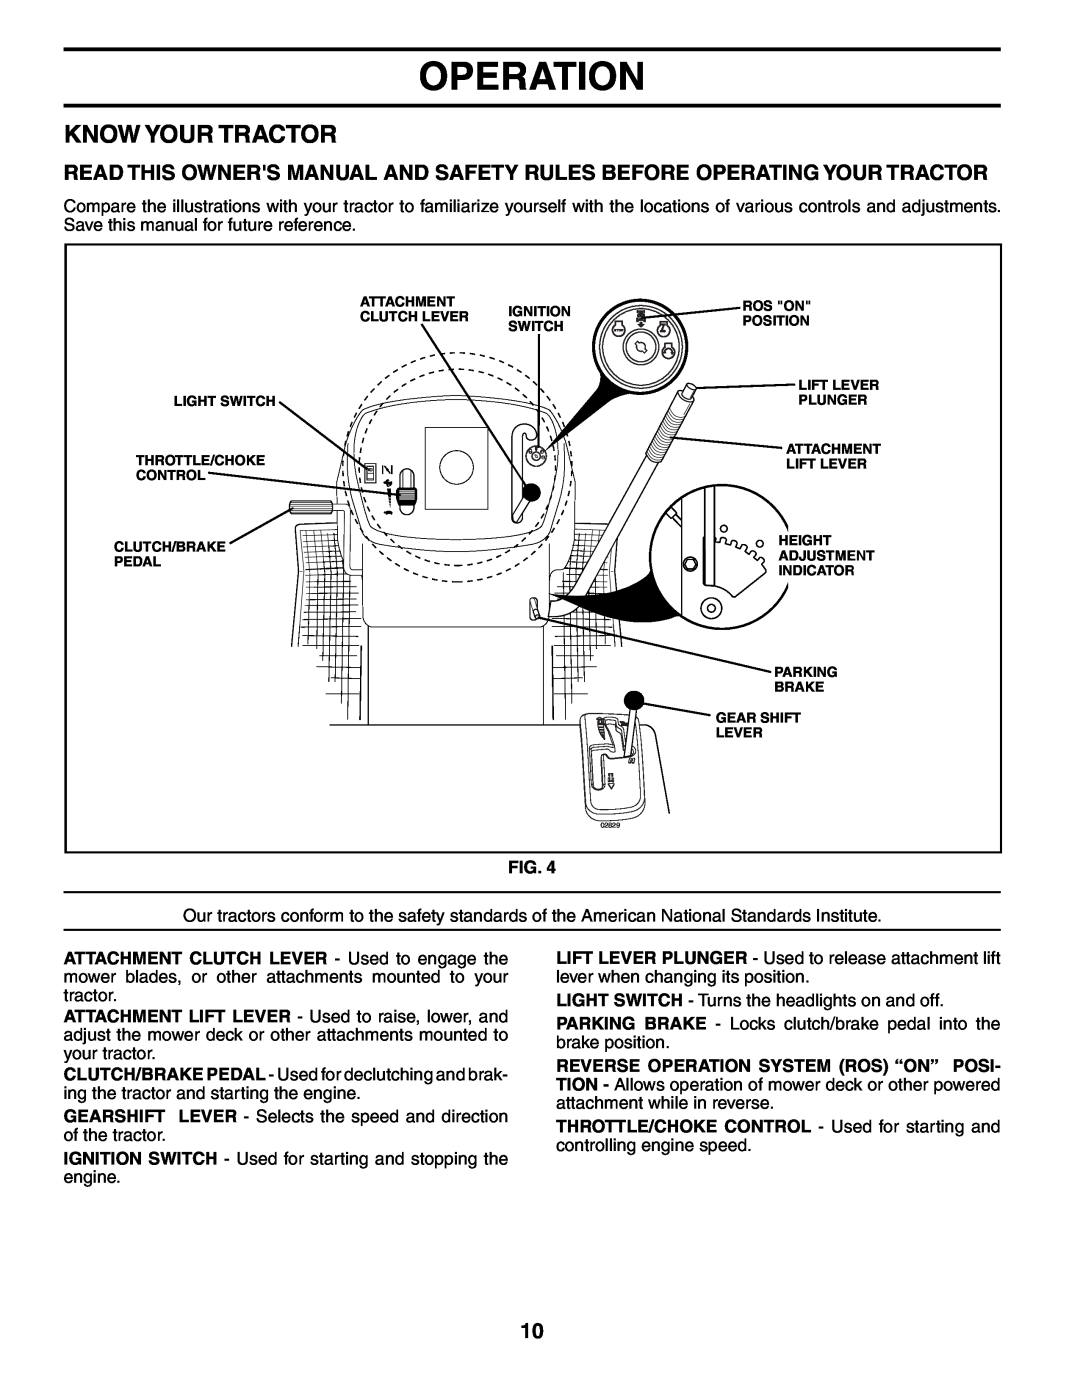 Weed Eater HD13538 manual Know Your Tractor, Operation 